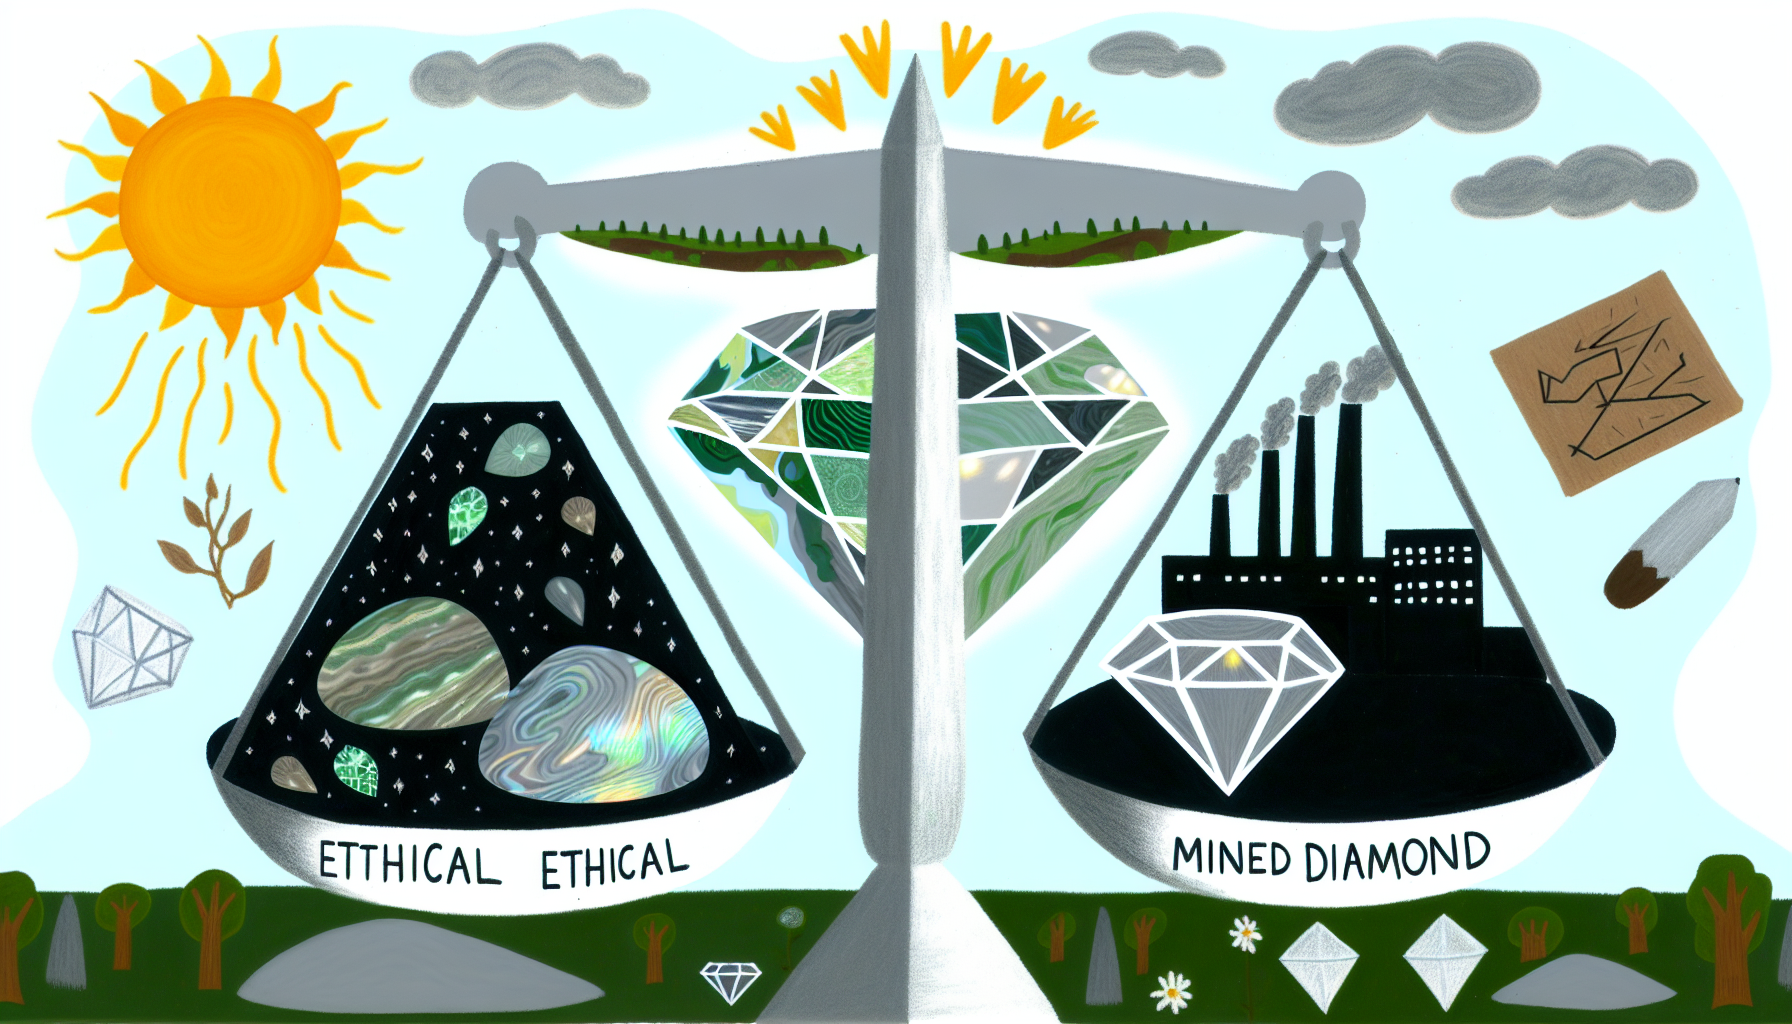 Comparison of ethical considerations between moissanite and mined diamonds